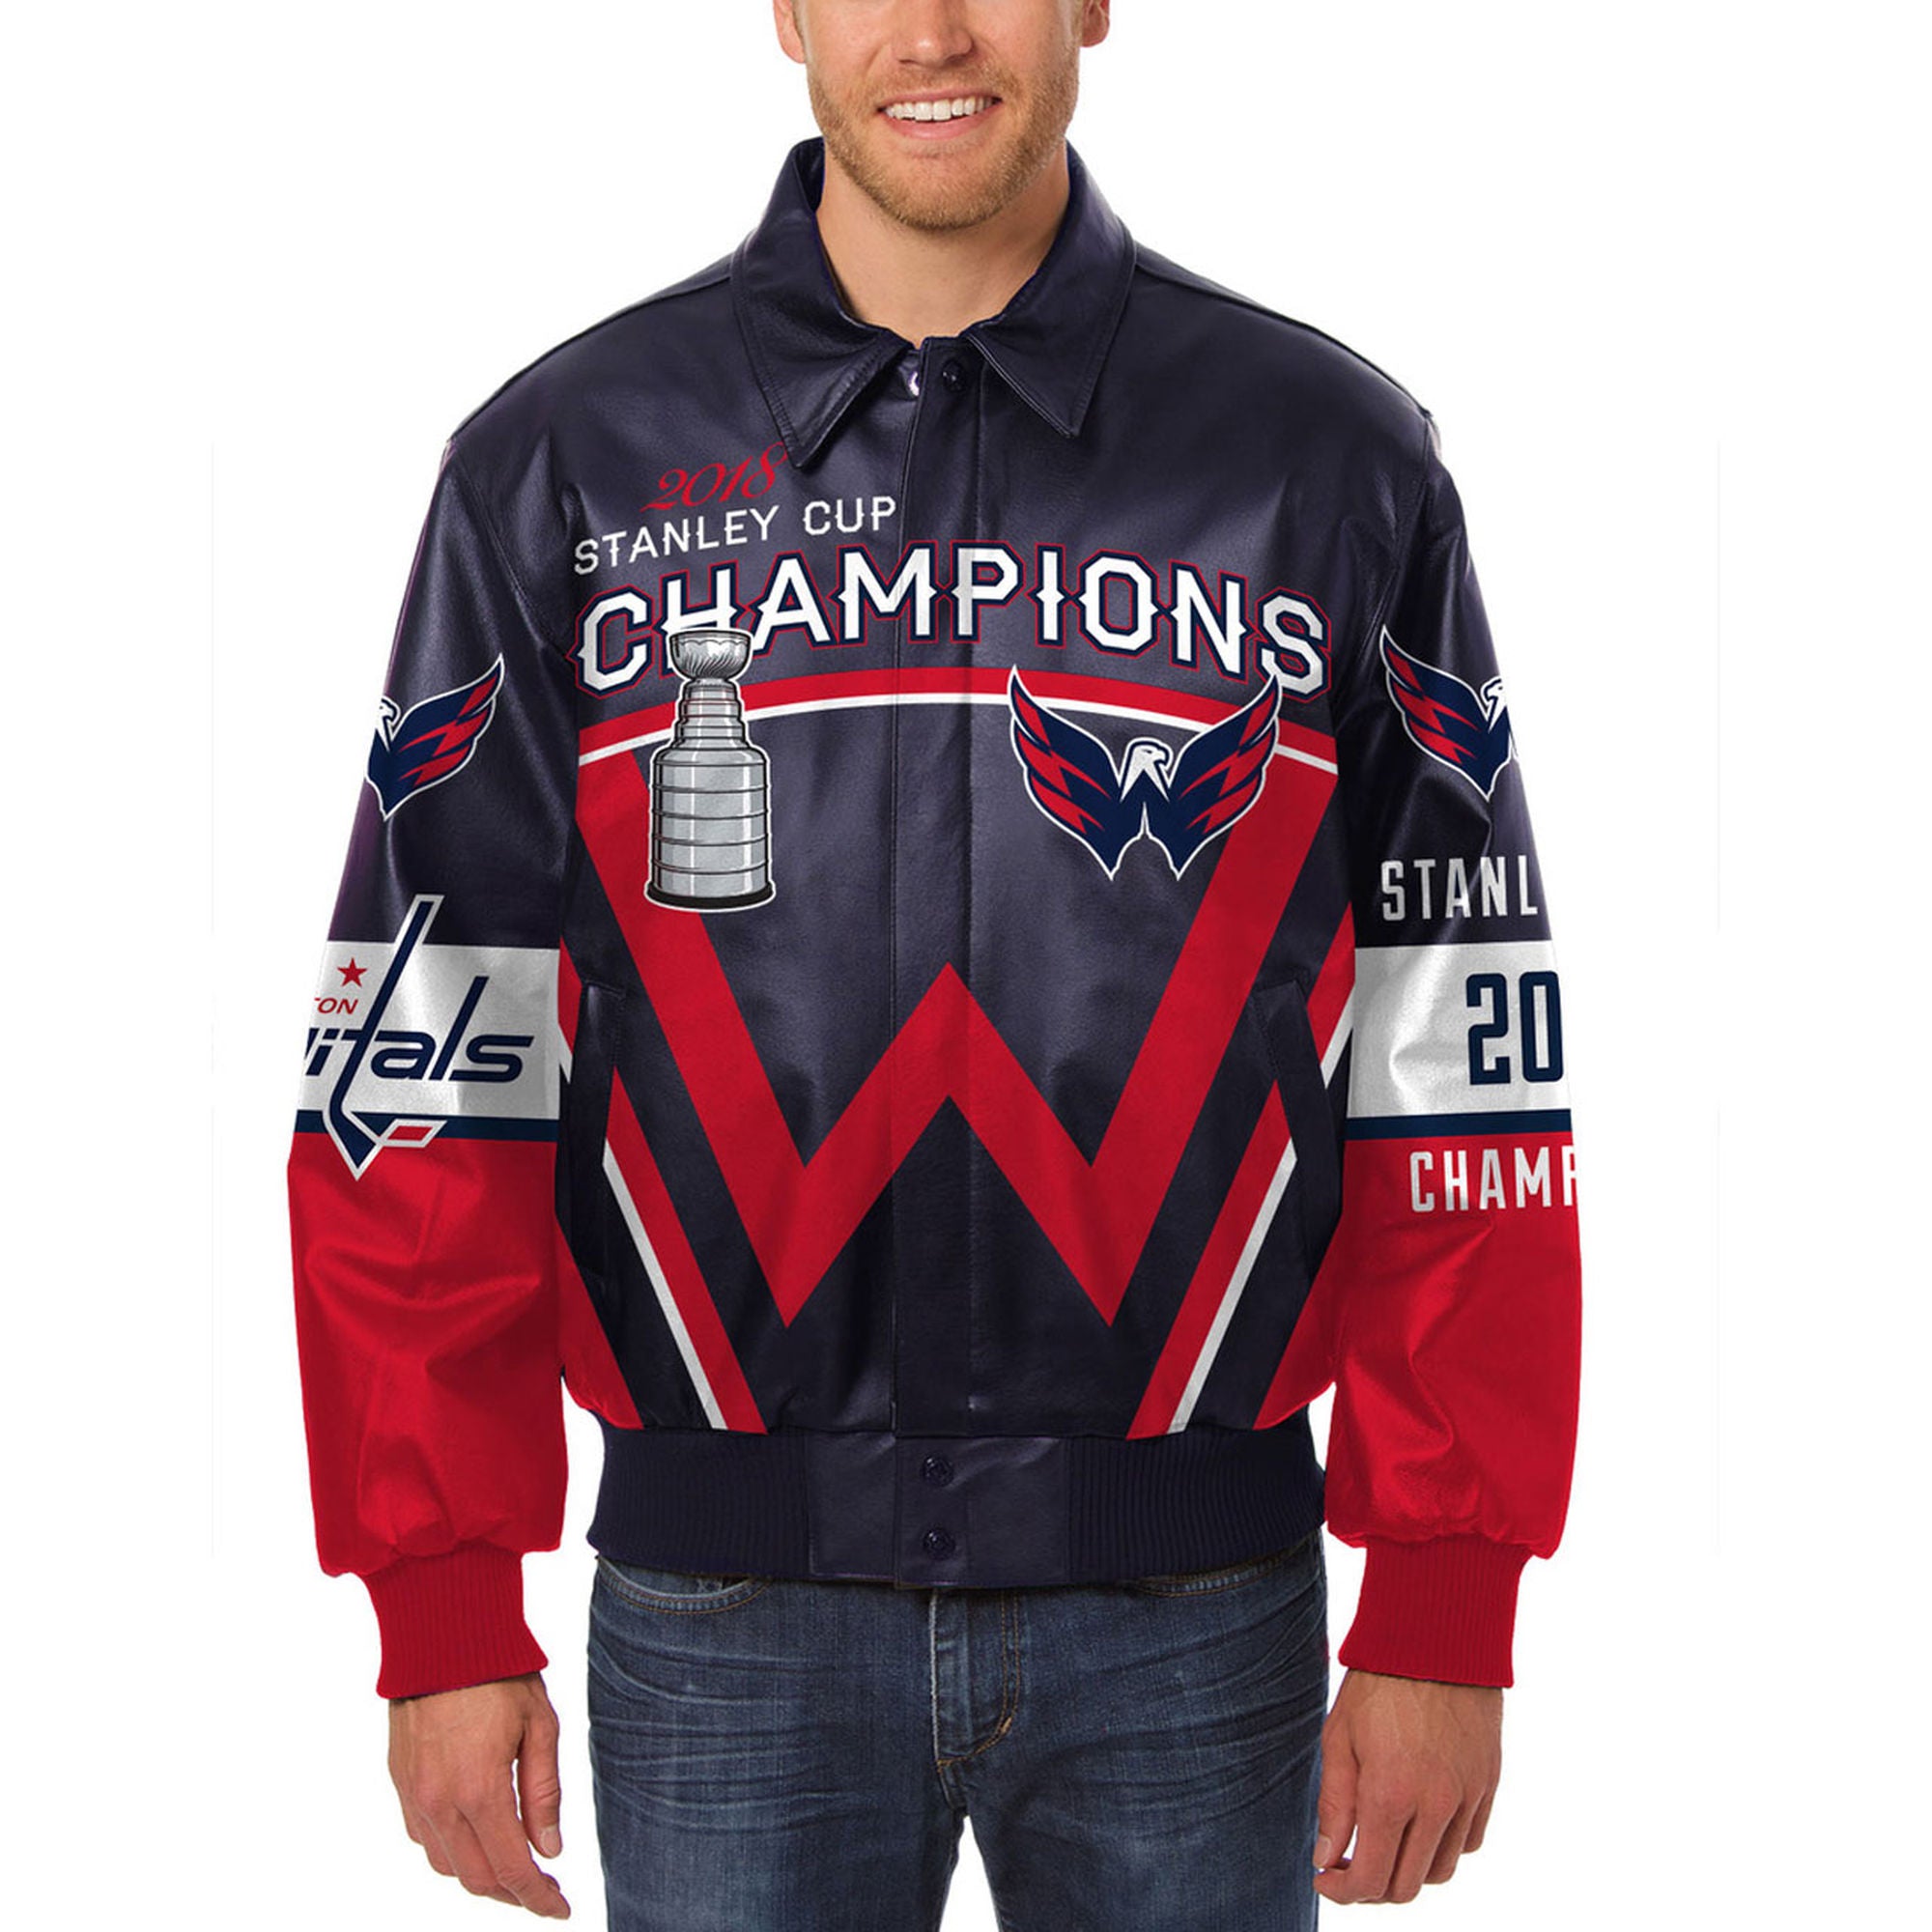 Maker of Jacket Fashion Jackets Chicago Blackhawks Stanley Cup Champions